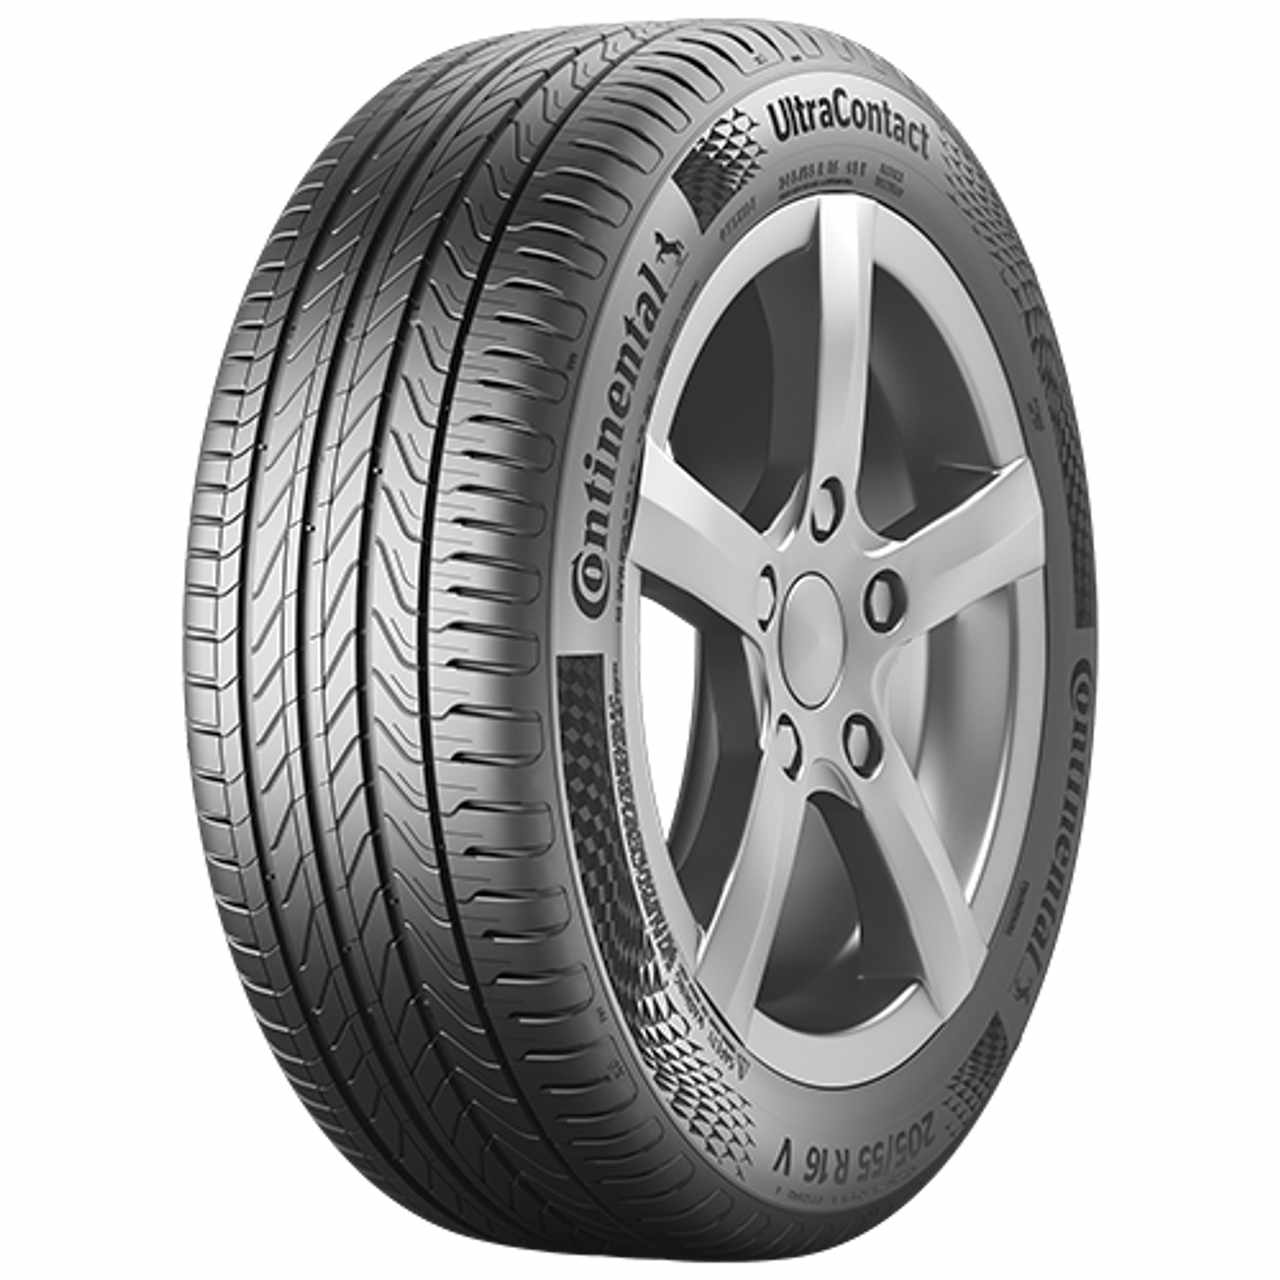 CONTINENTAL ULTRACONTACT (EVc) 195/65R15 91H BSW von Continental